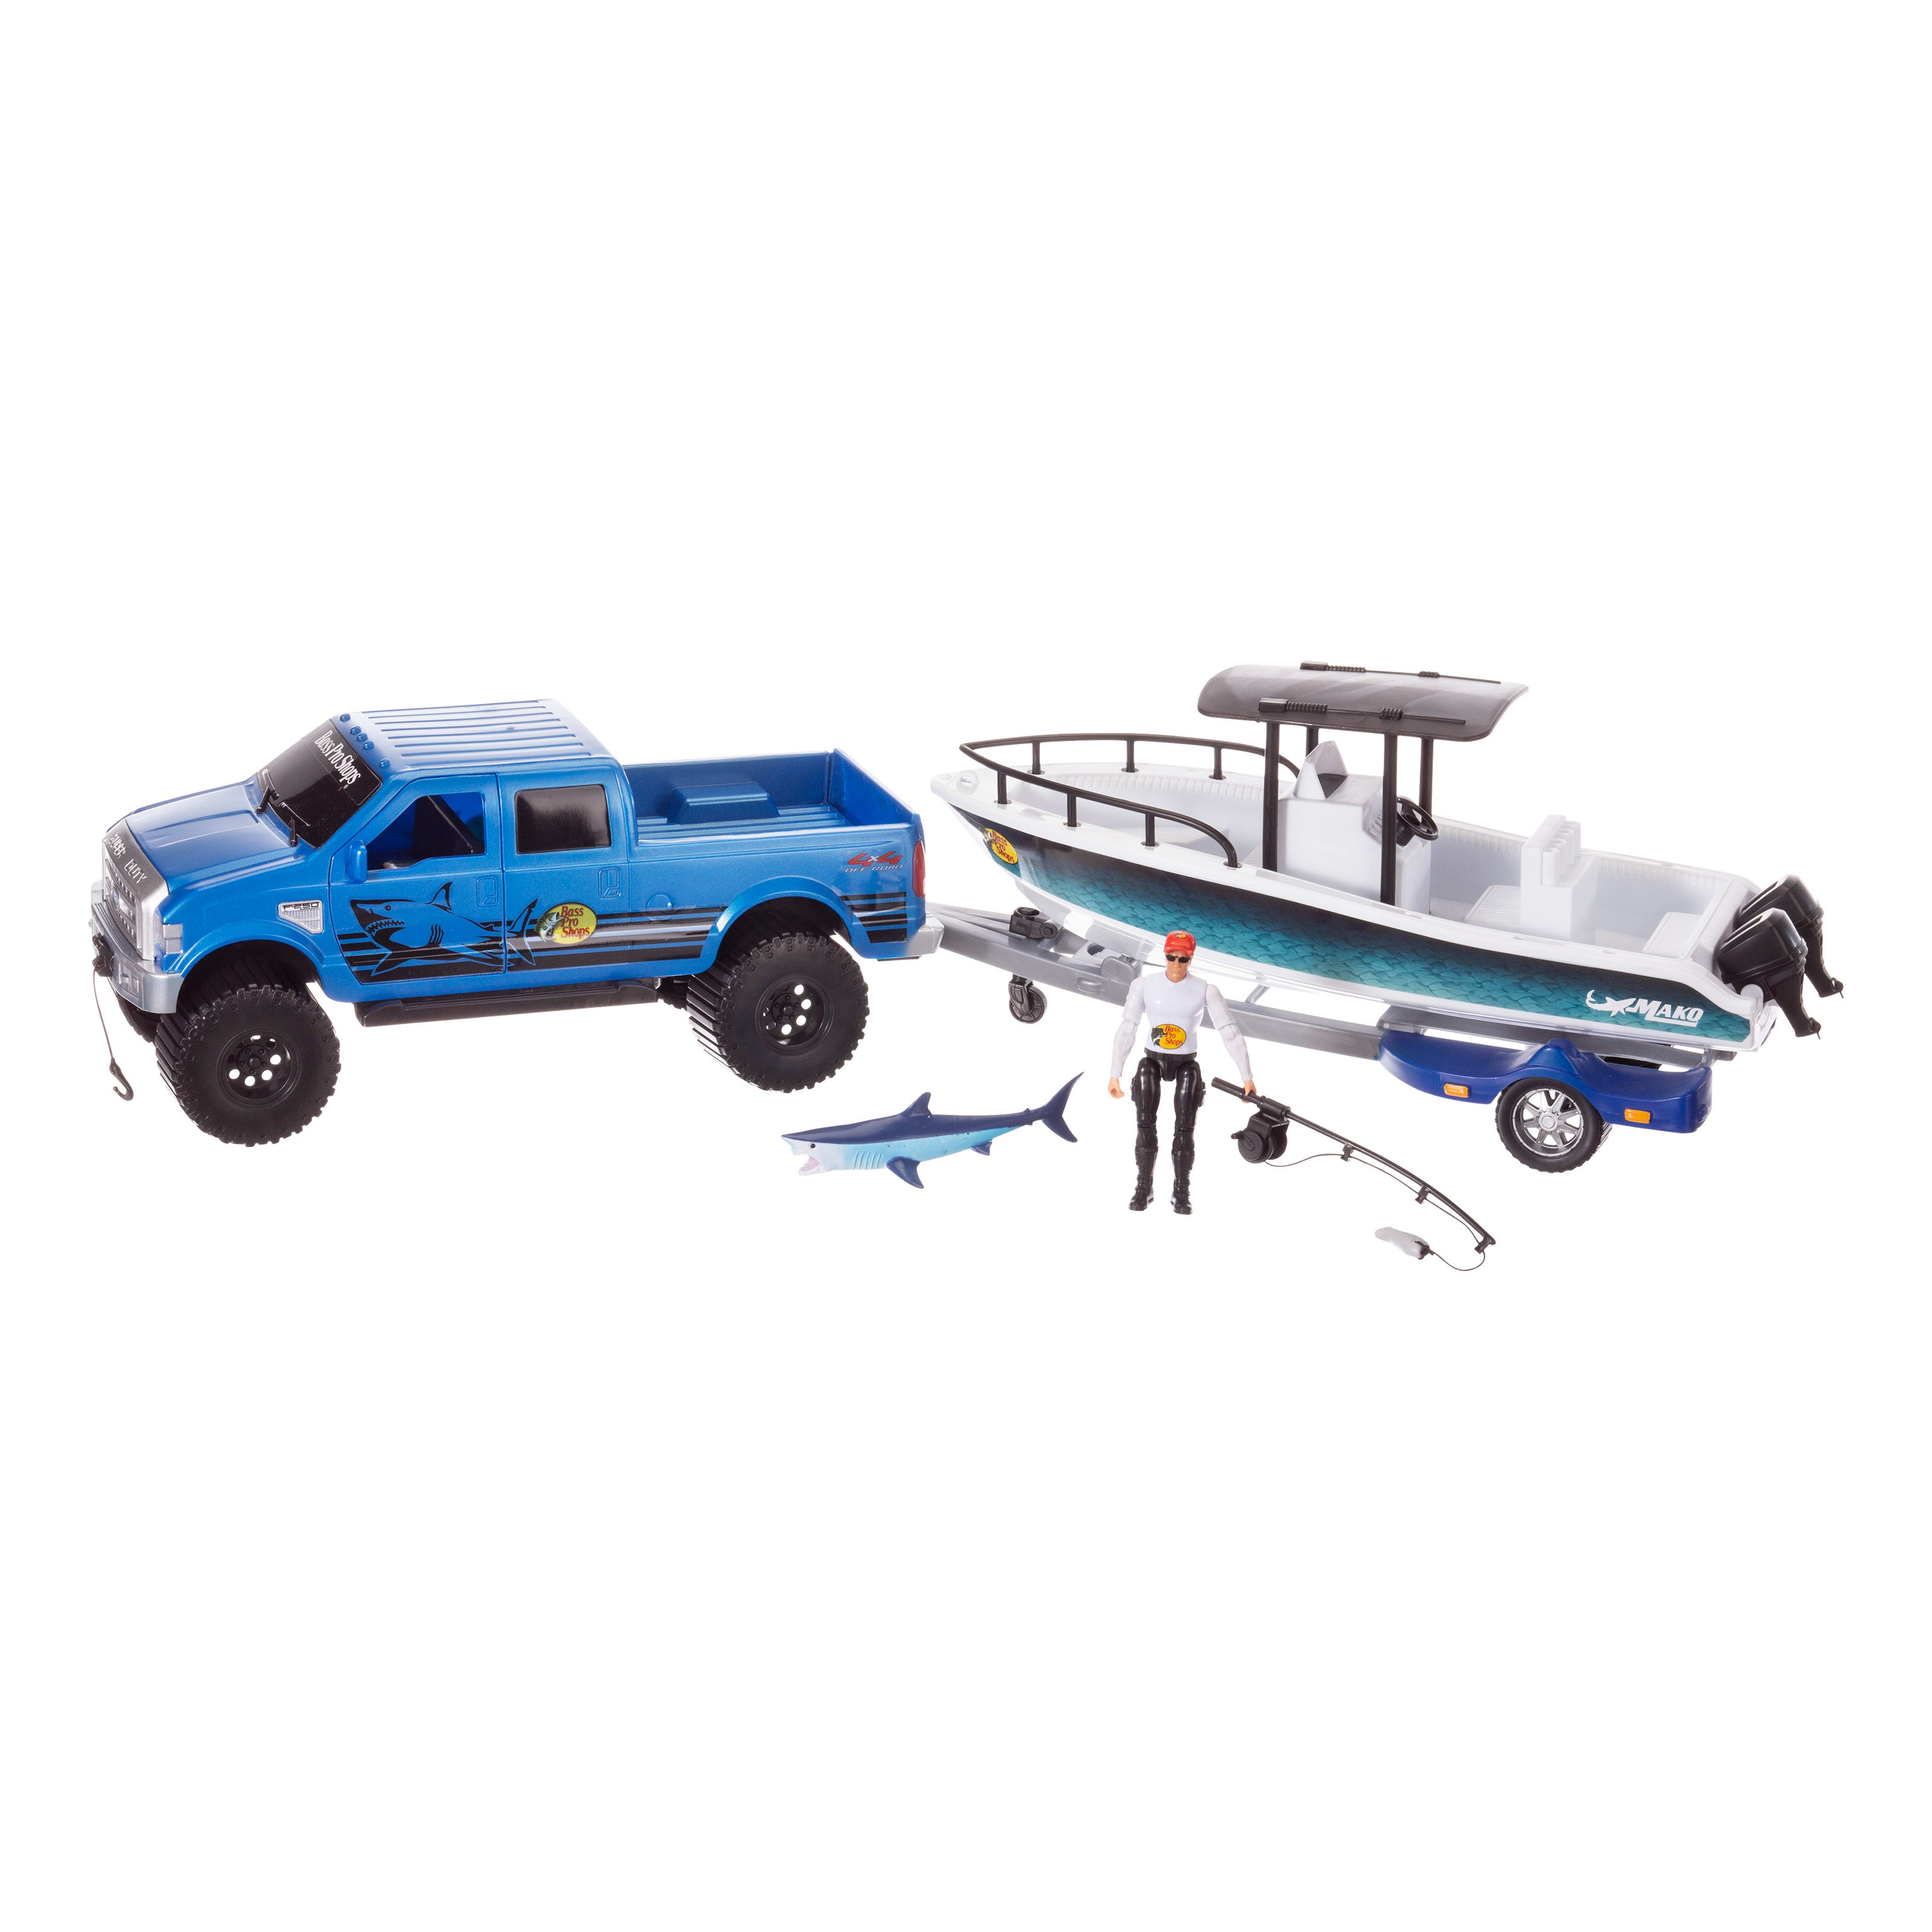 Bass Pro Shops® Imagination Adventure Ford® F-250 Saltwater Playset